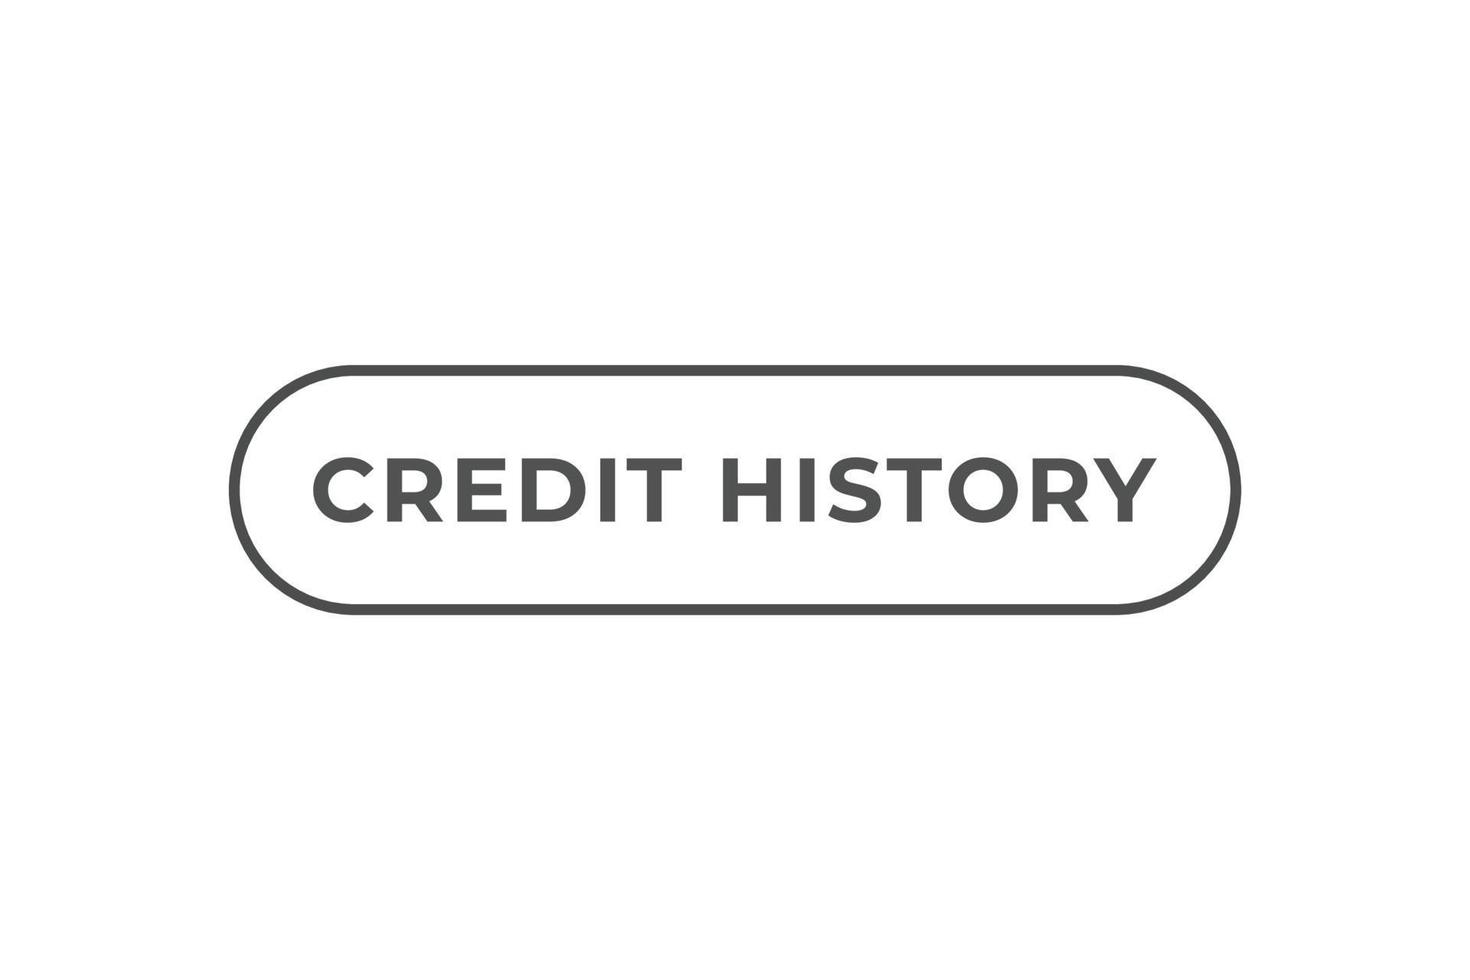 Credit History Button. Speech Bubble, Banner Label Credit History vector